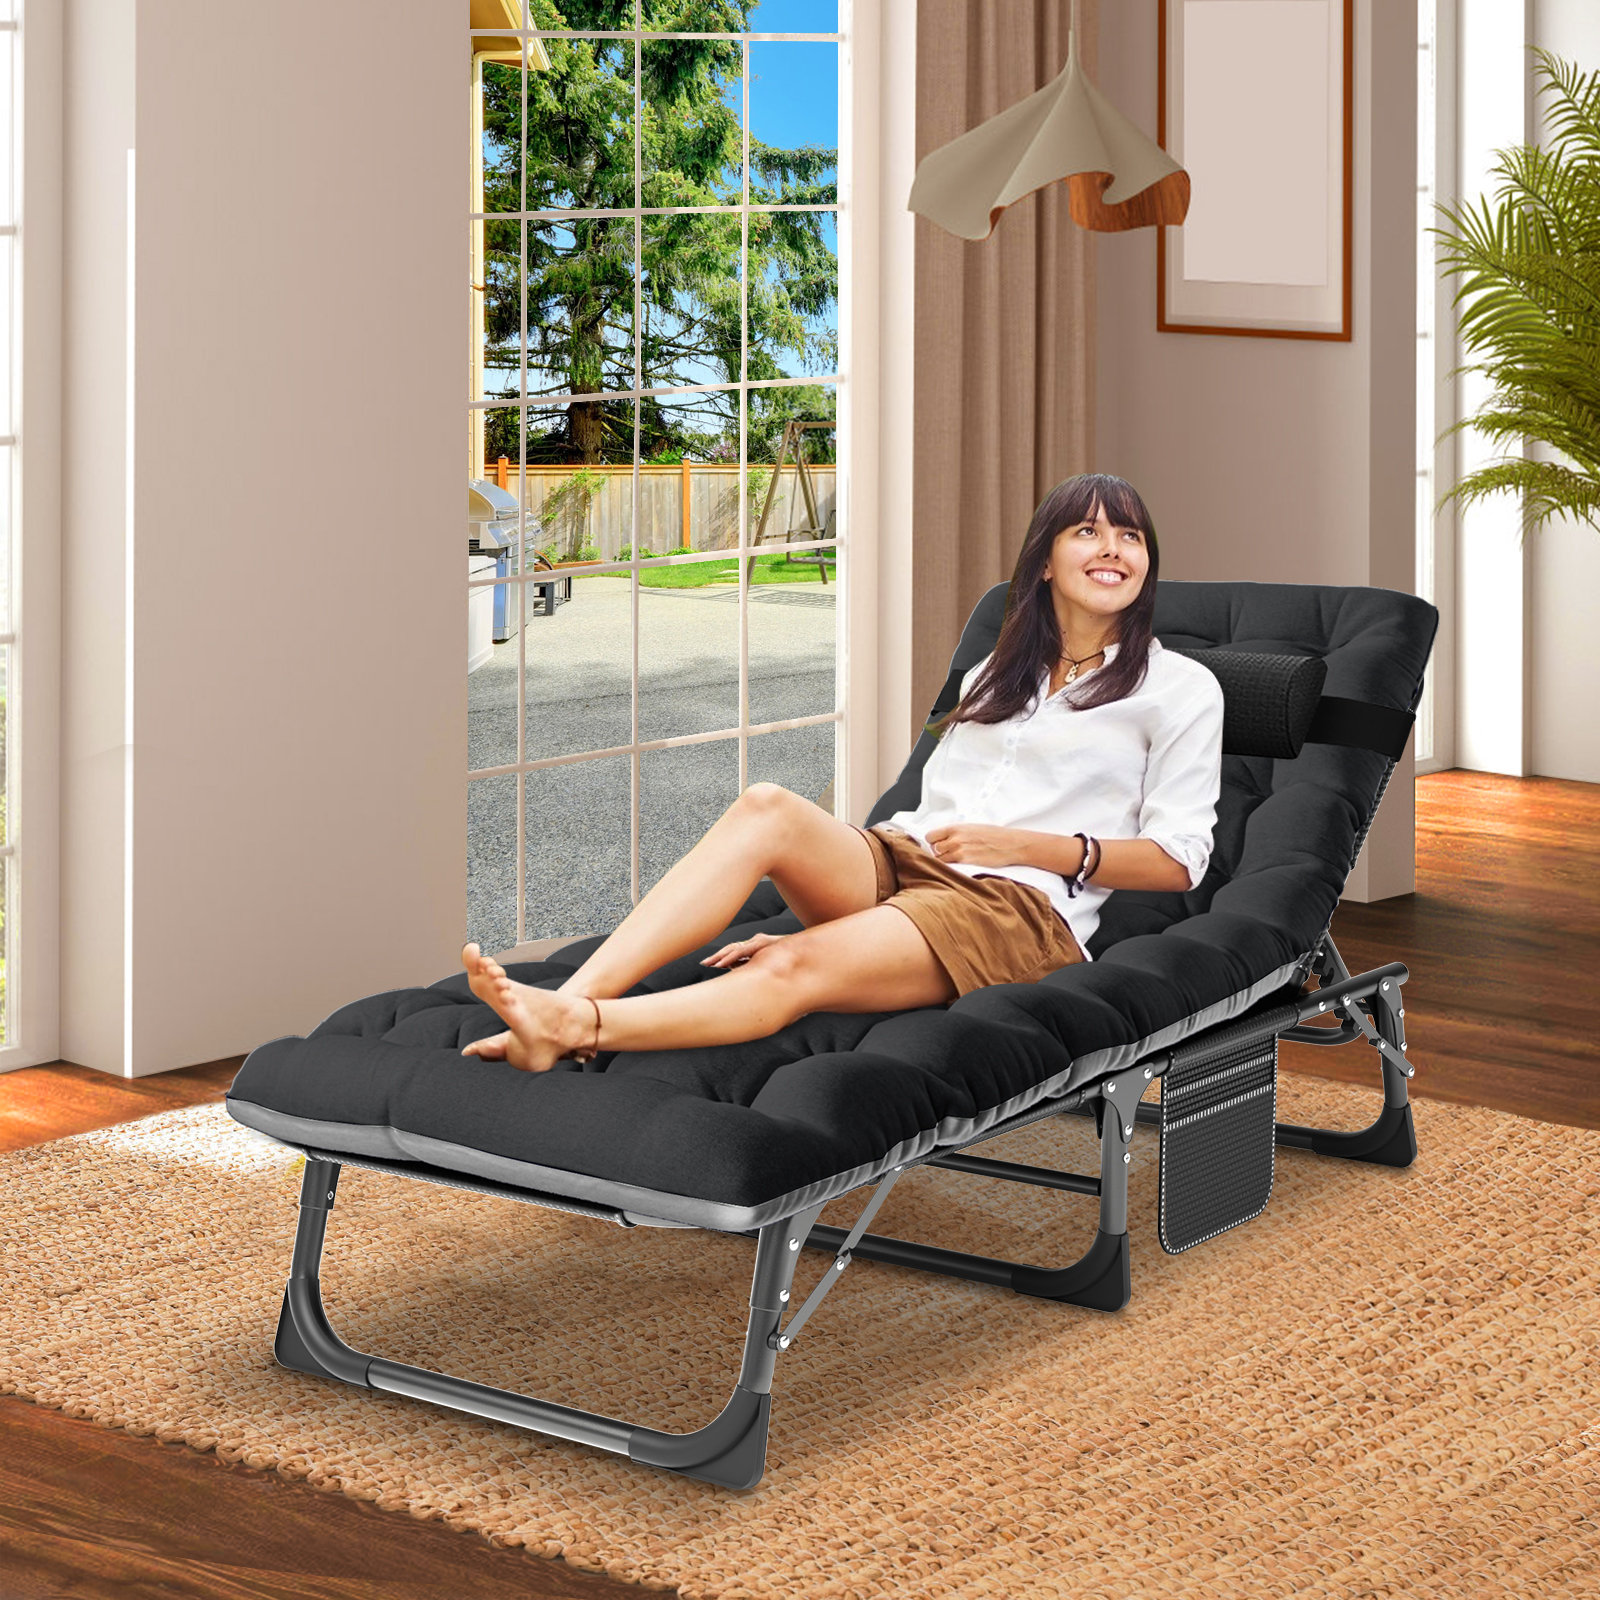 Cyprinus Double 2 Man Wide Guy Bedchair, From £299.99